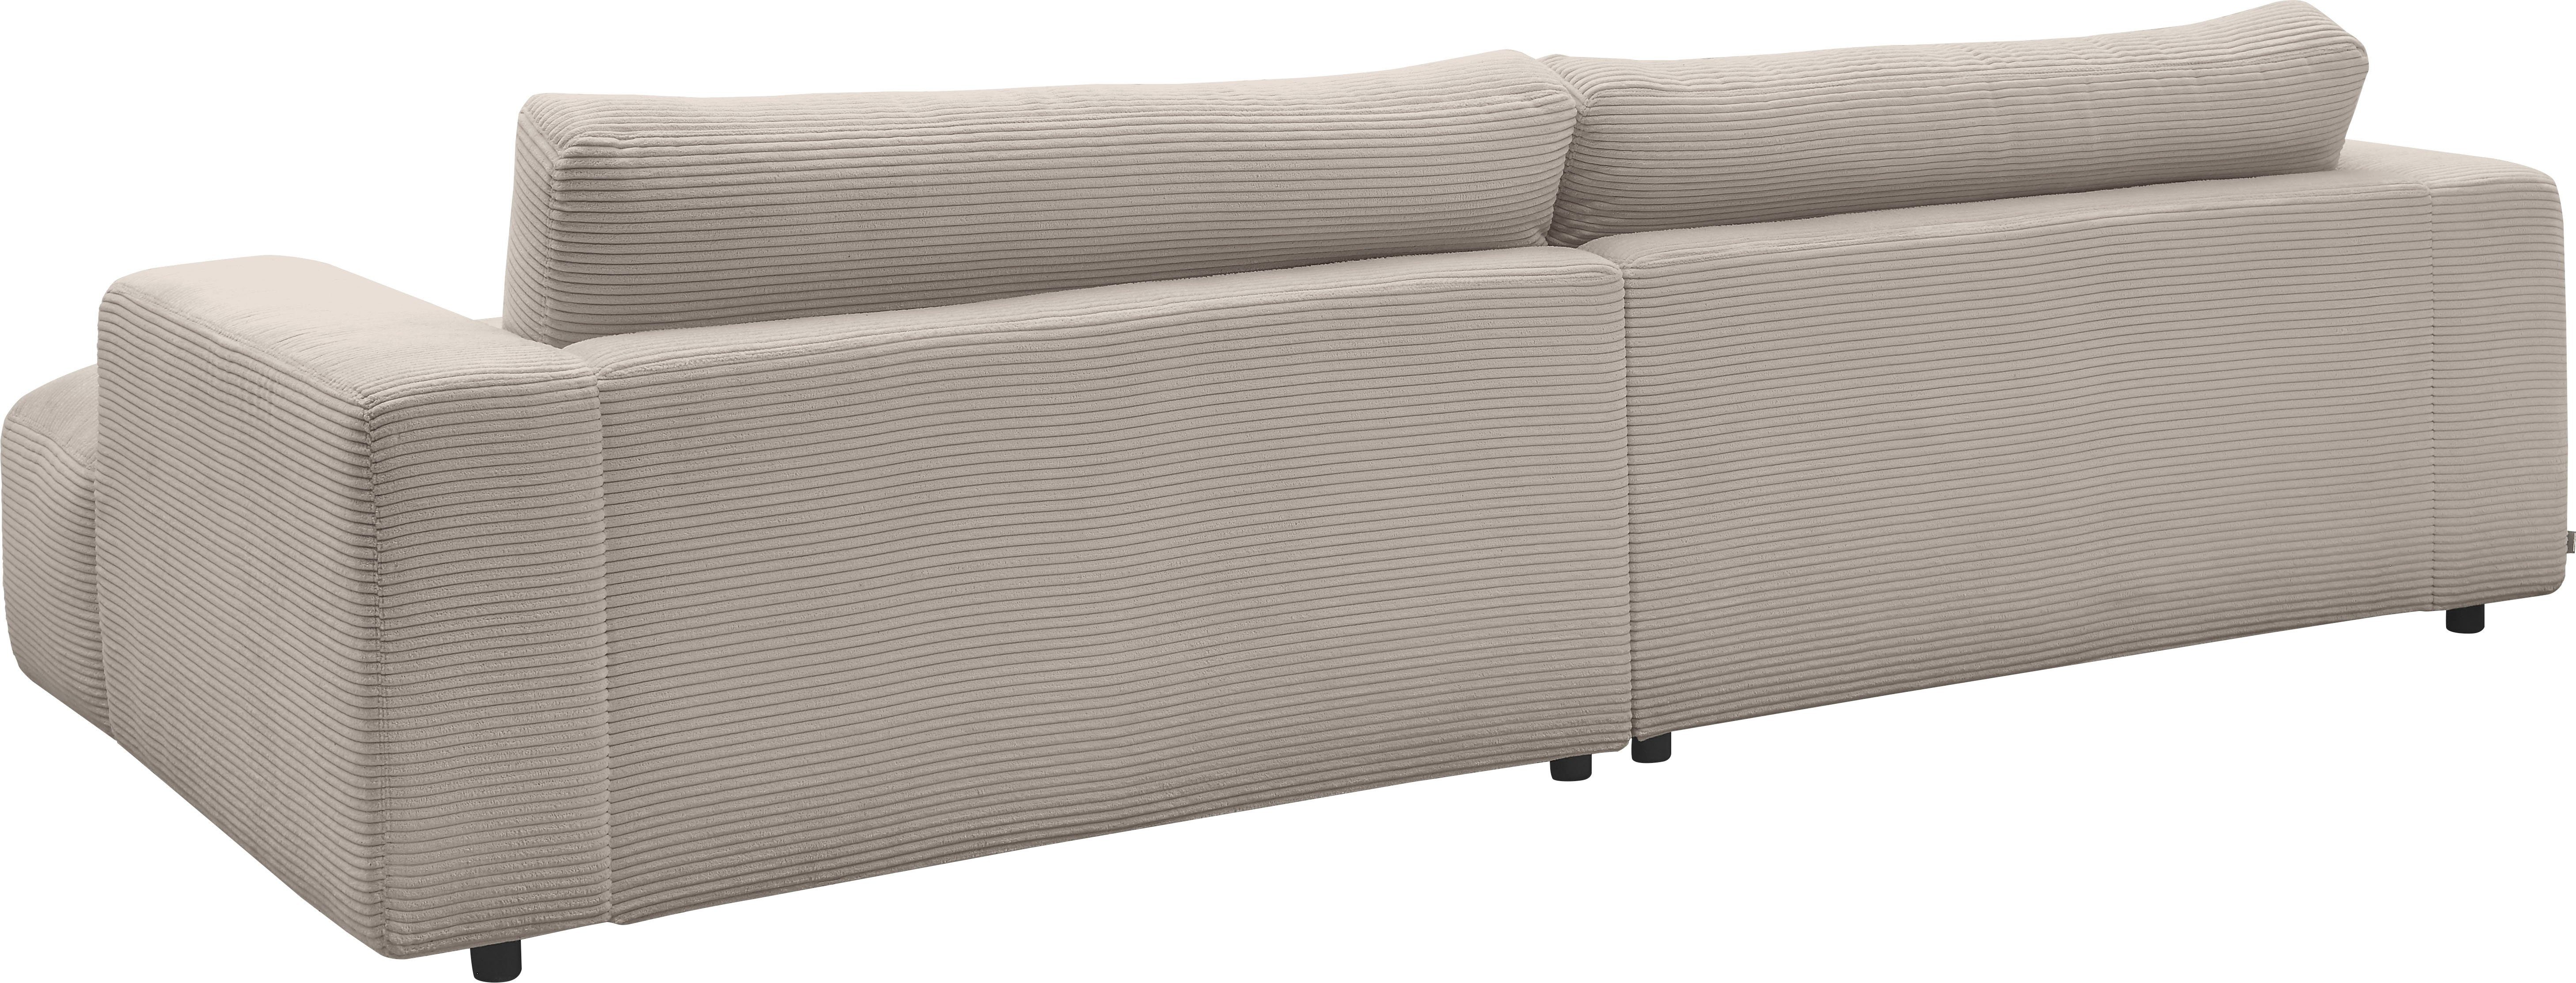 GALLERY M branded Cord-Bezug, 292 Lucia, Musterring Breite cm by light-grey Loungesofa